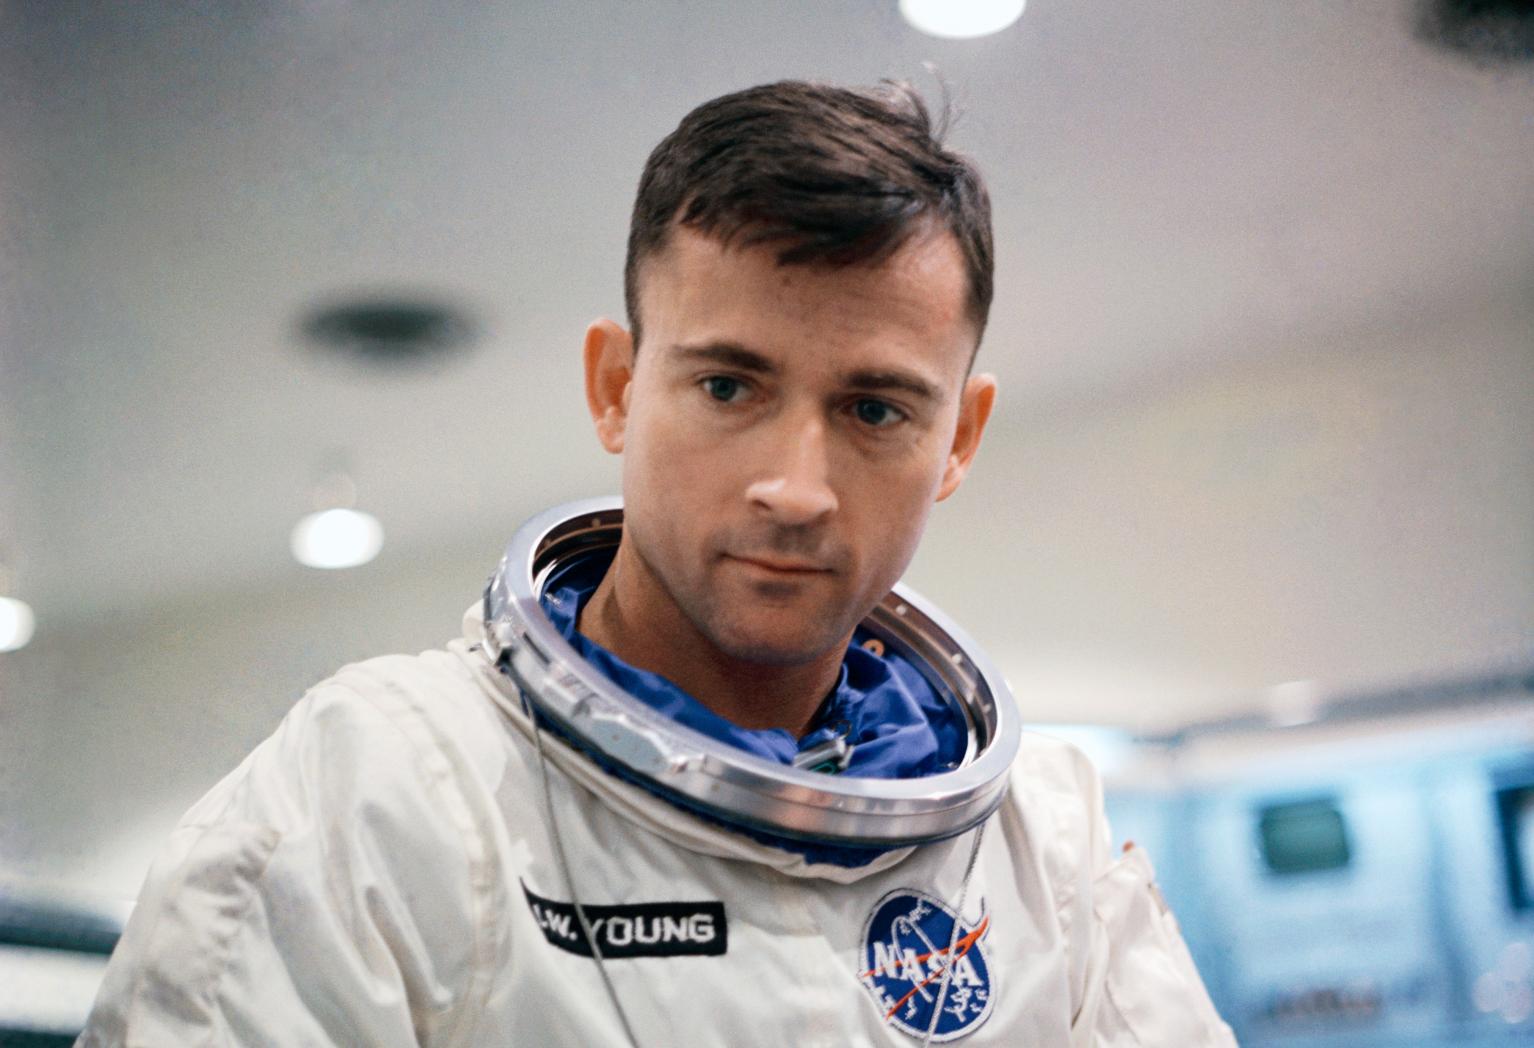 Suited-Up- Astronaut John W. Young